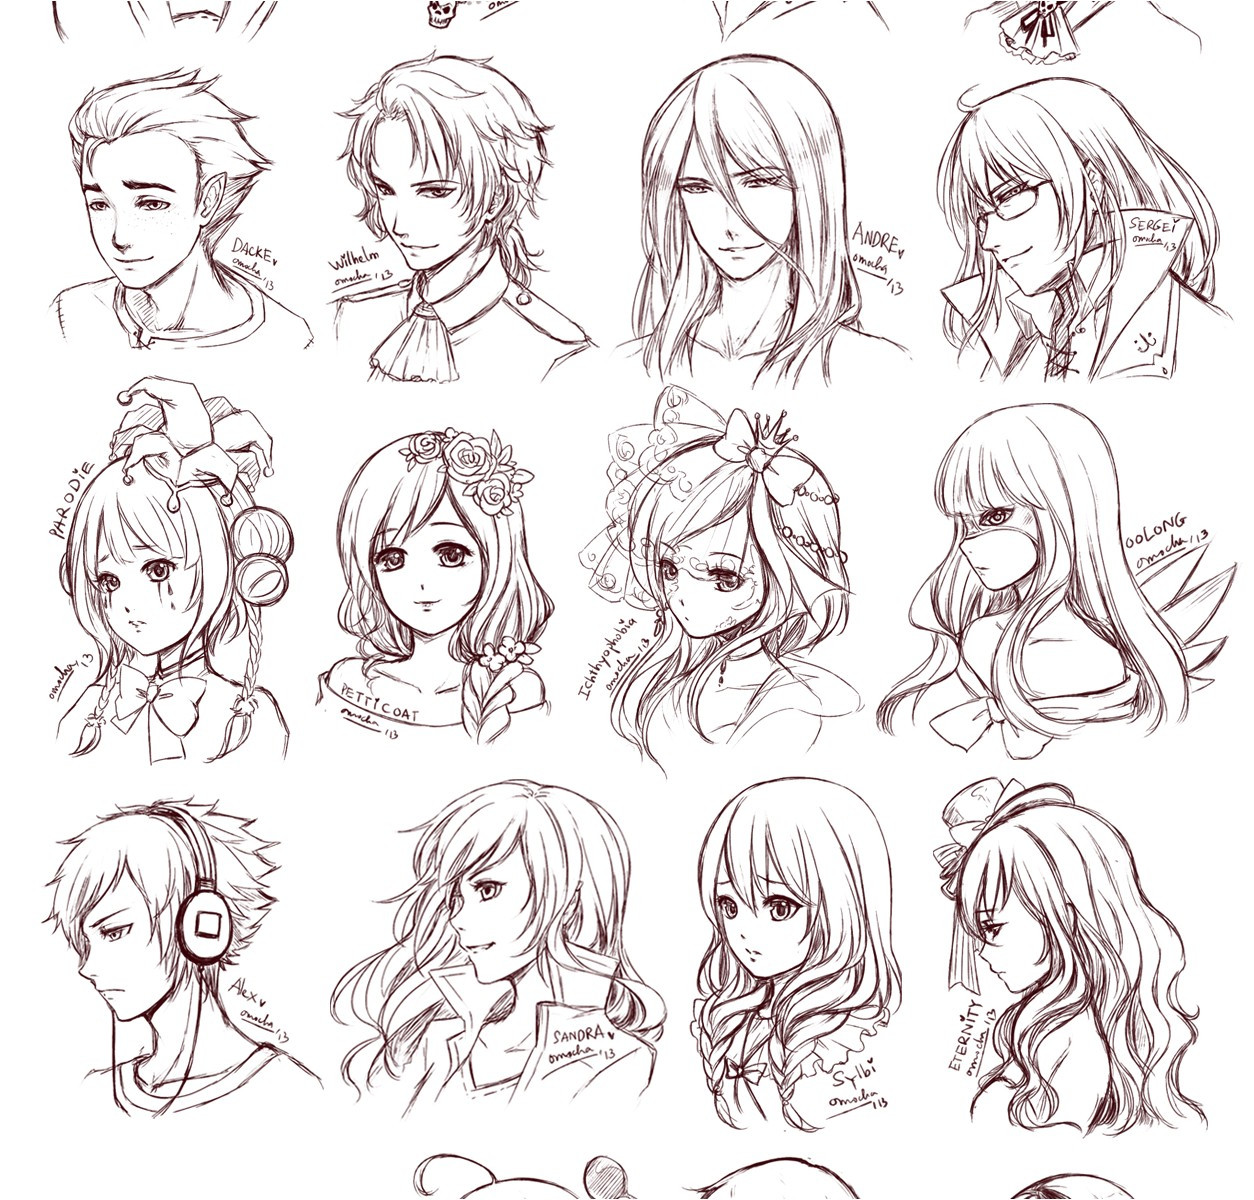 Anime Hairstyles Male / Male Anime Hair by alicewolfnas on DeviantArt